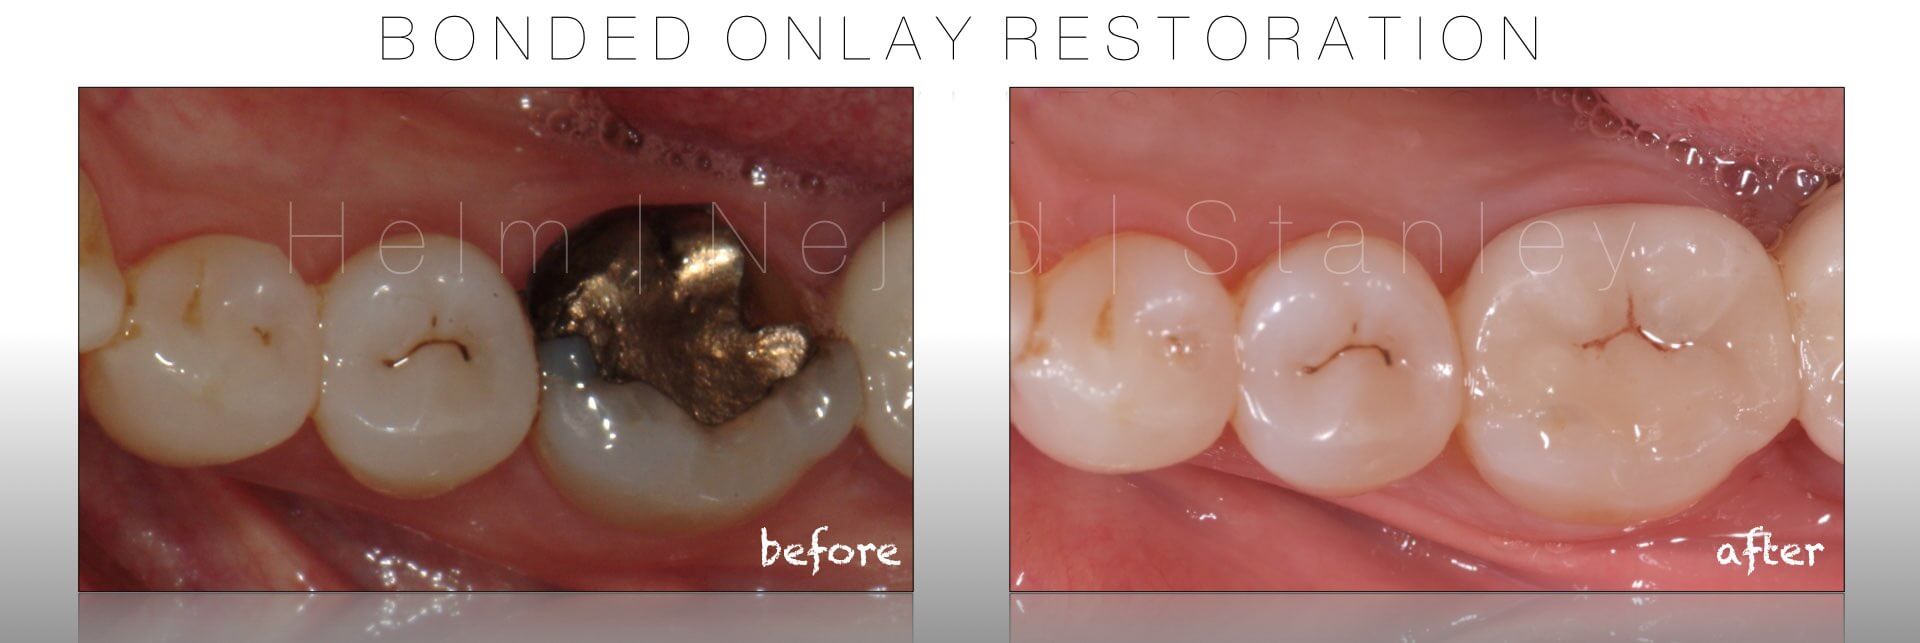 Onlay-Biomimetic-Before-After